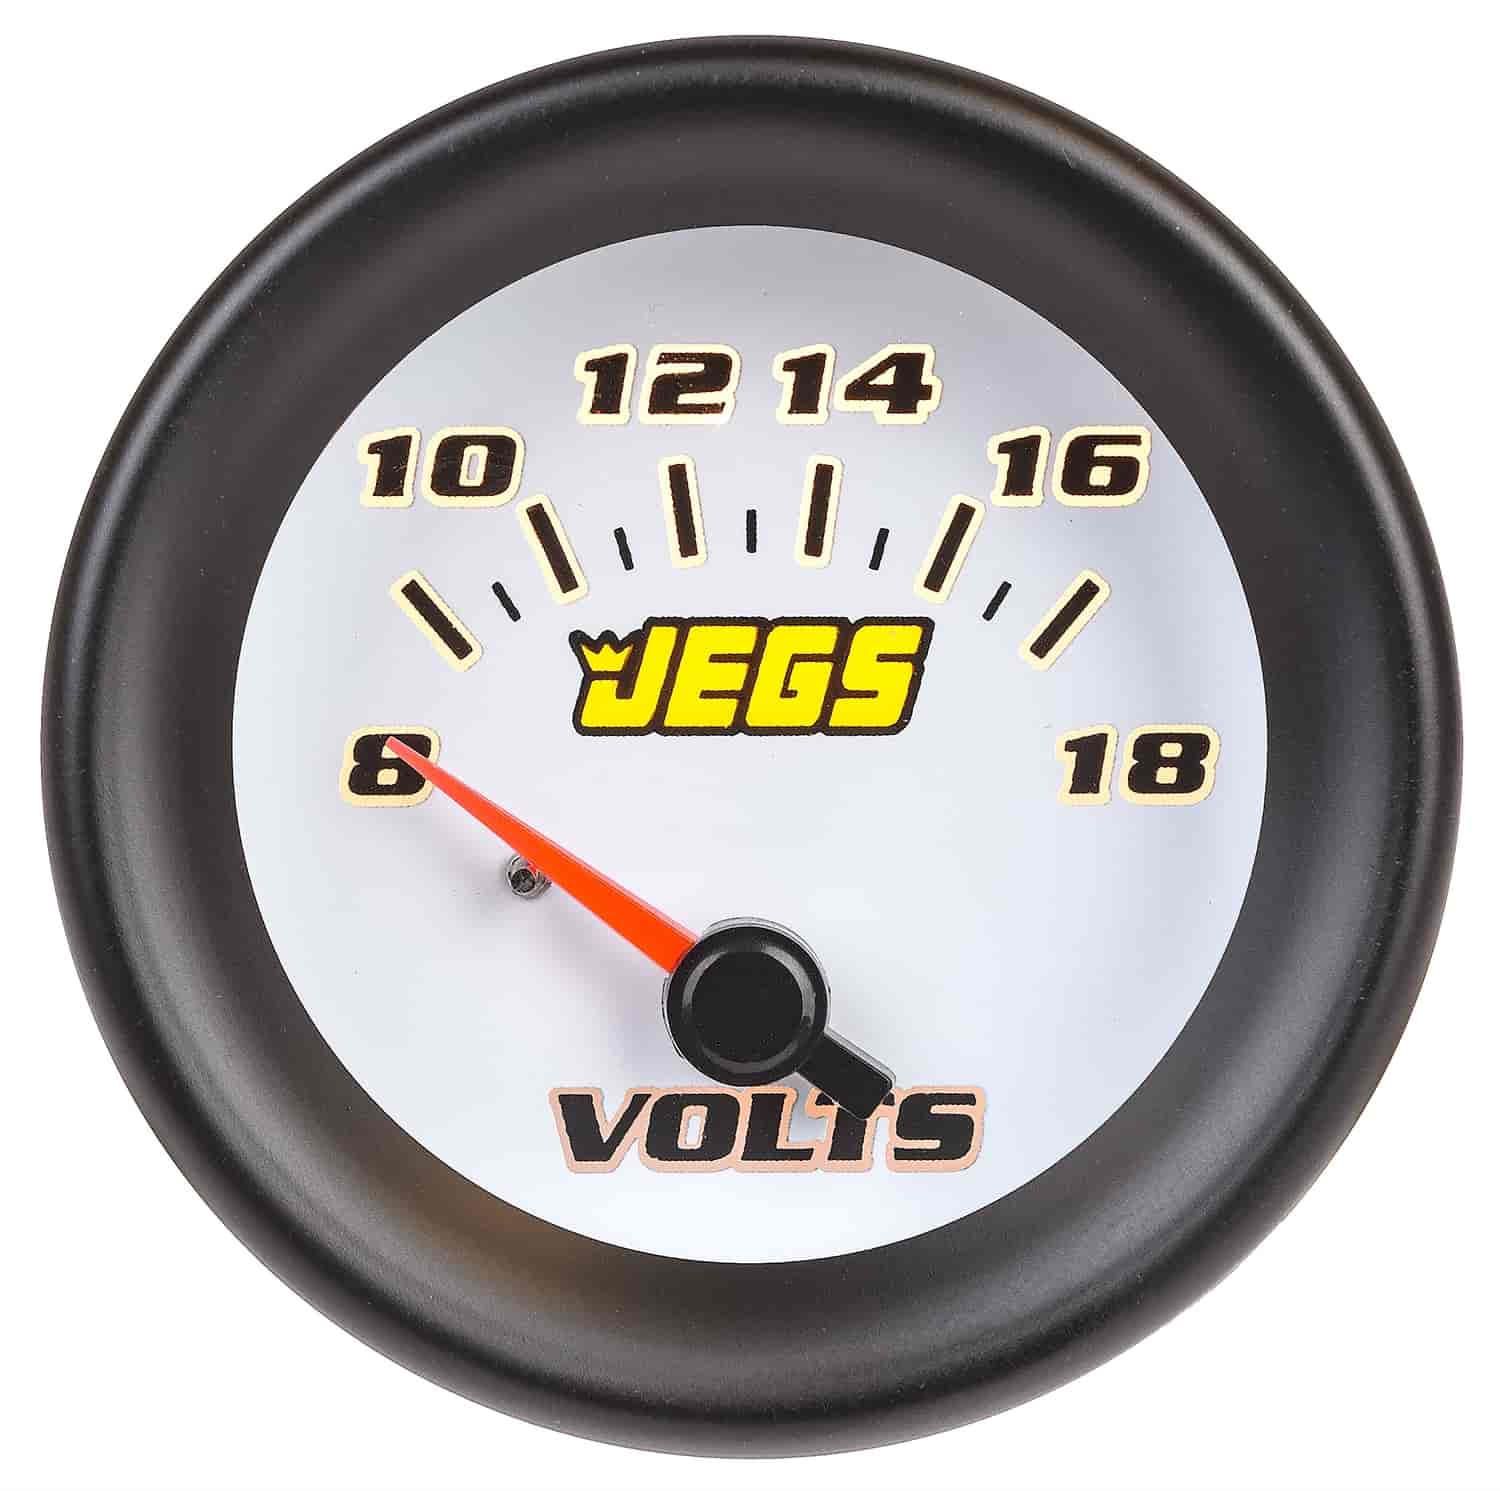 Voltmeter Gauge [2 1/16 in. Electrical, 8-18 Volts with White Face]